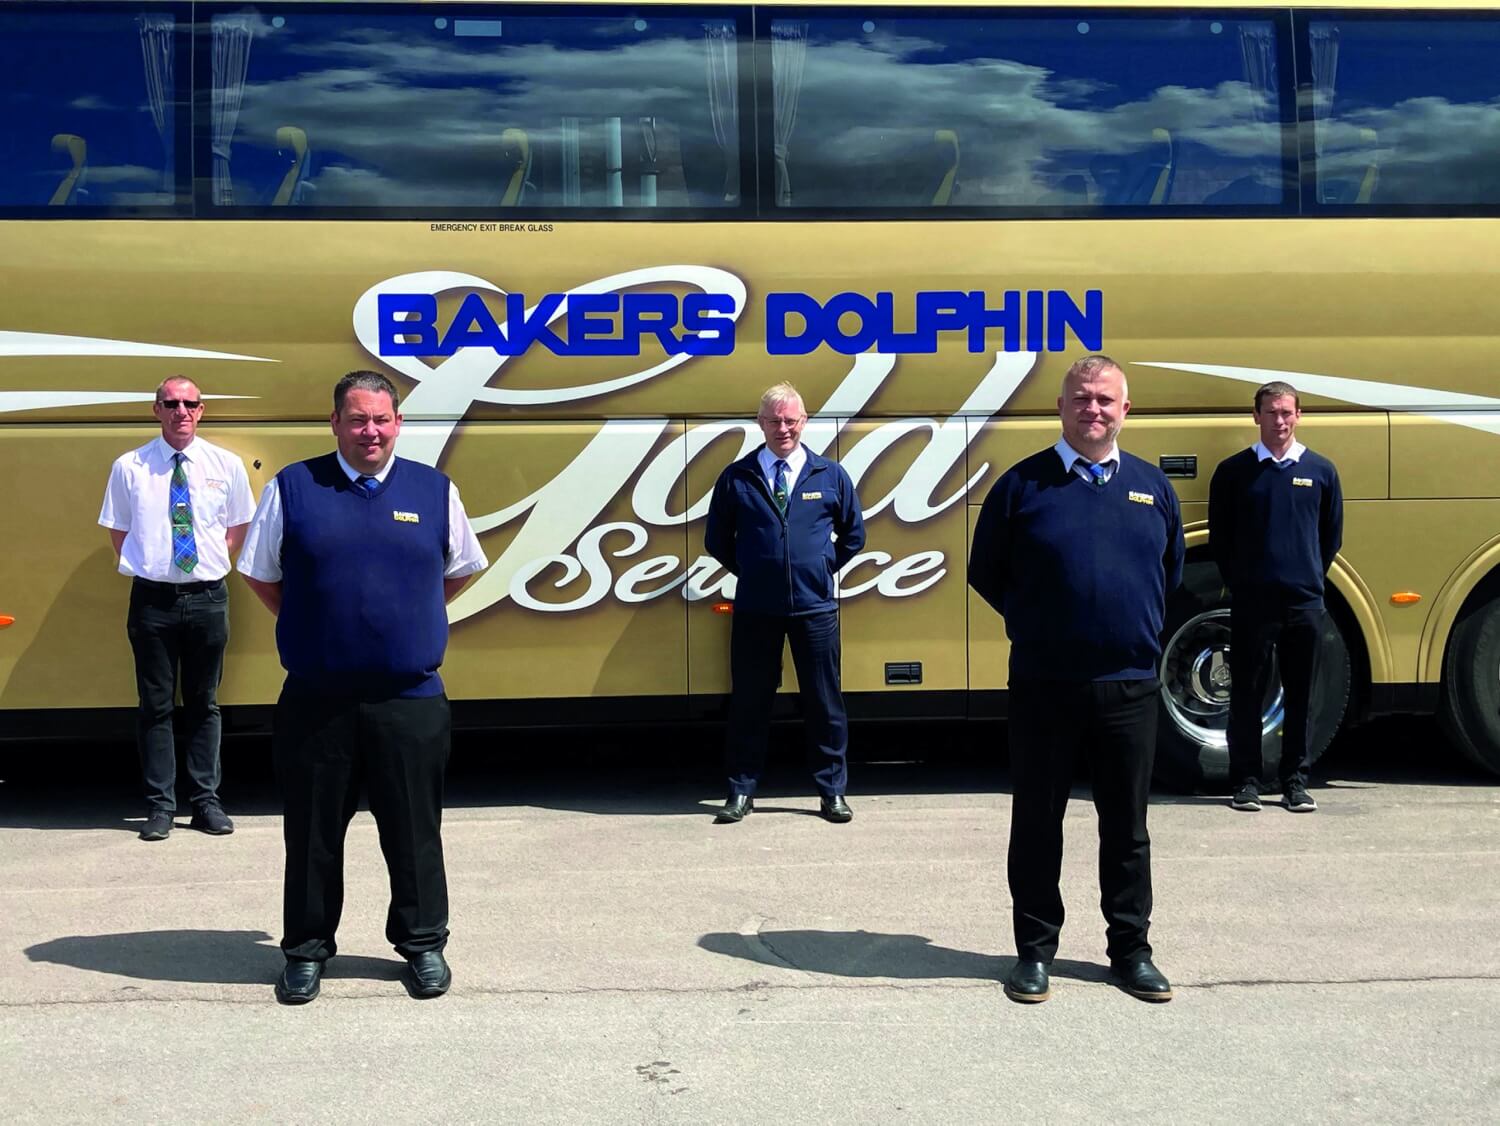 Bakers Dolphin drivers praised